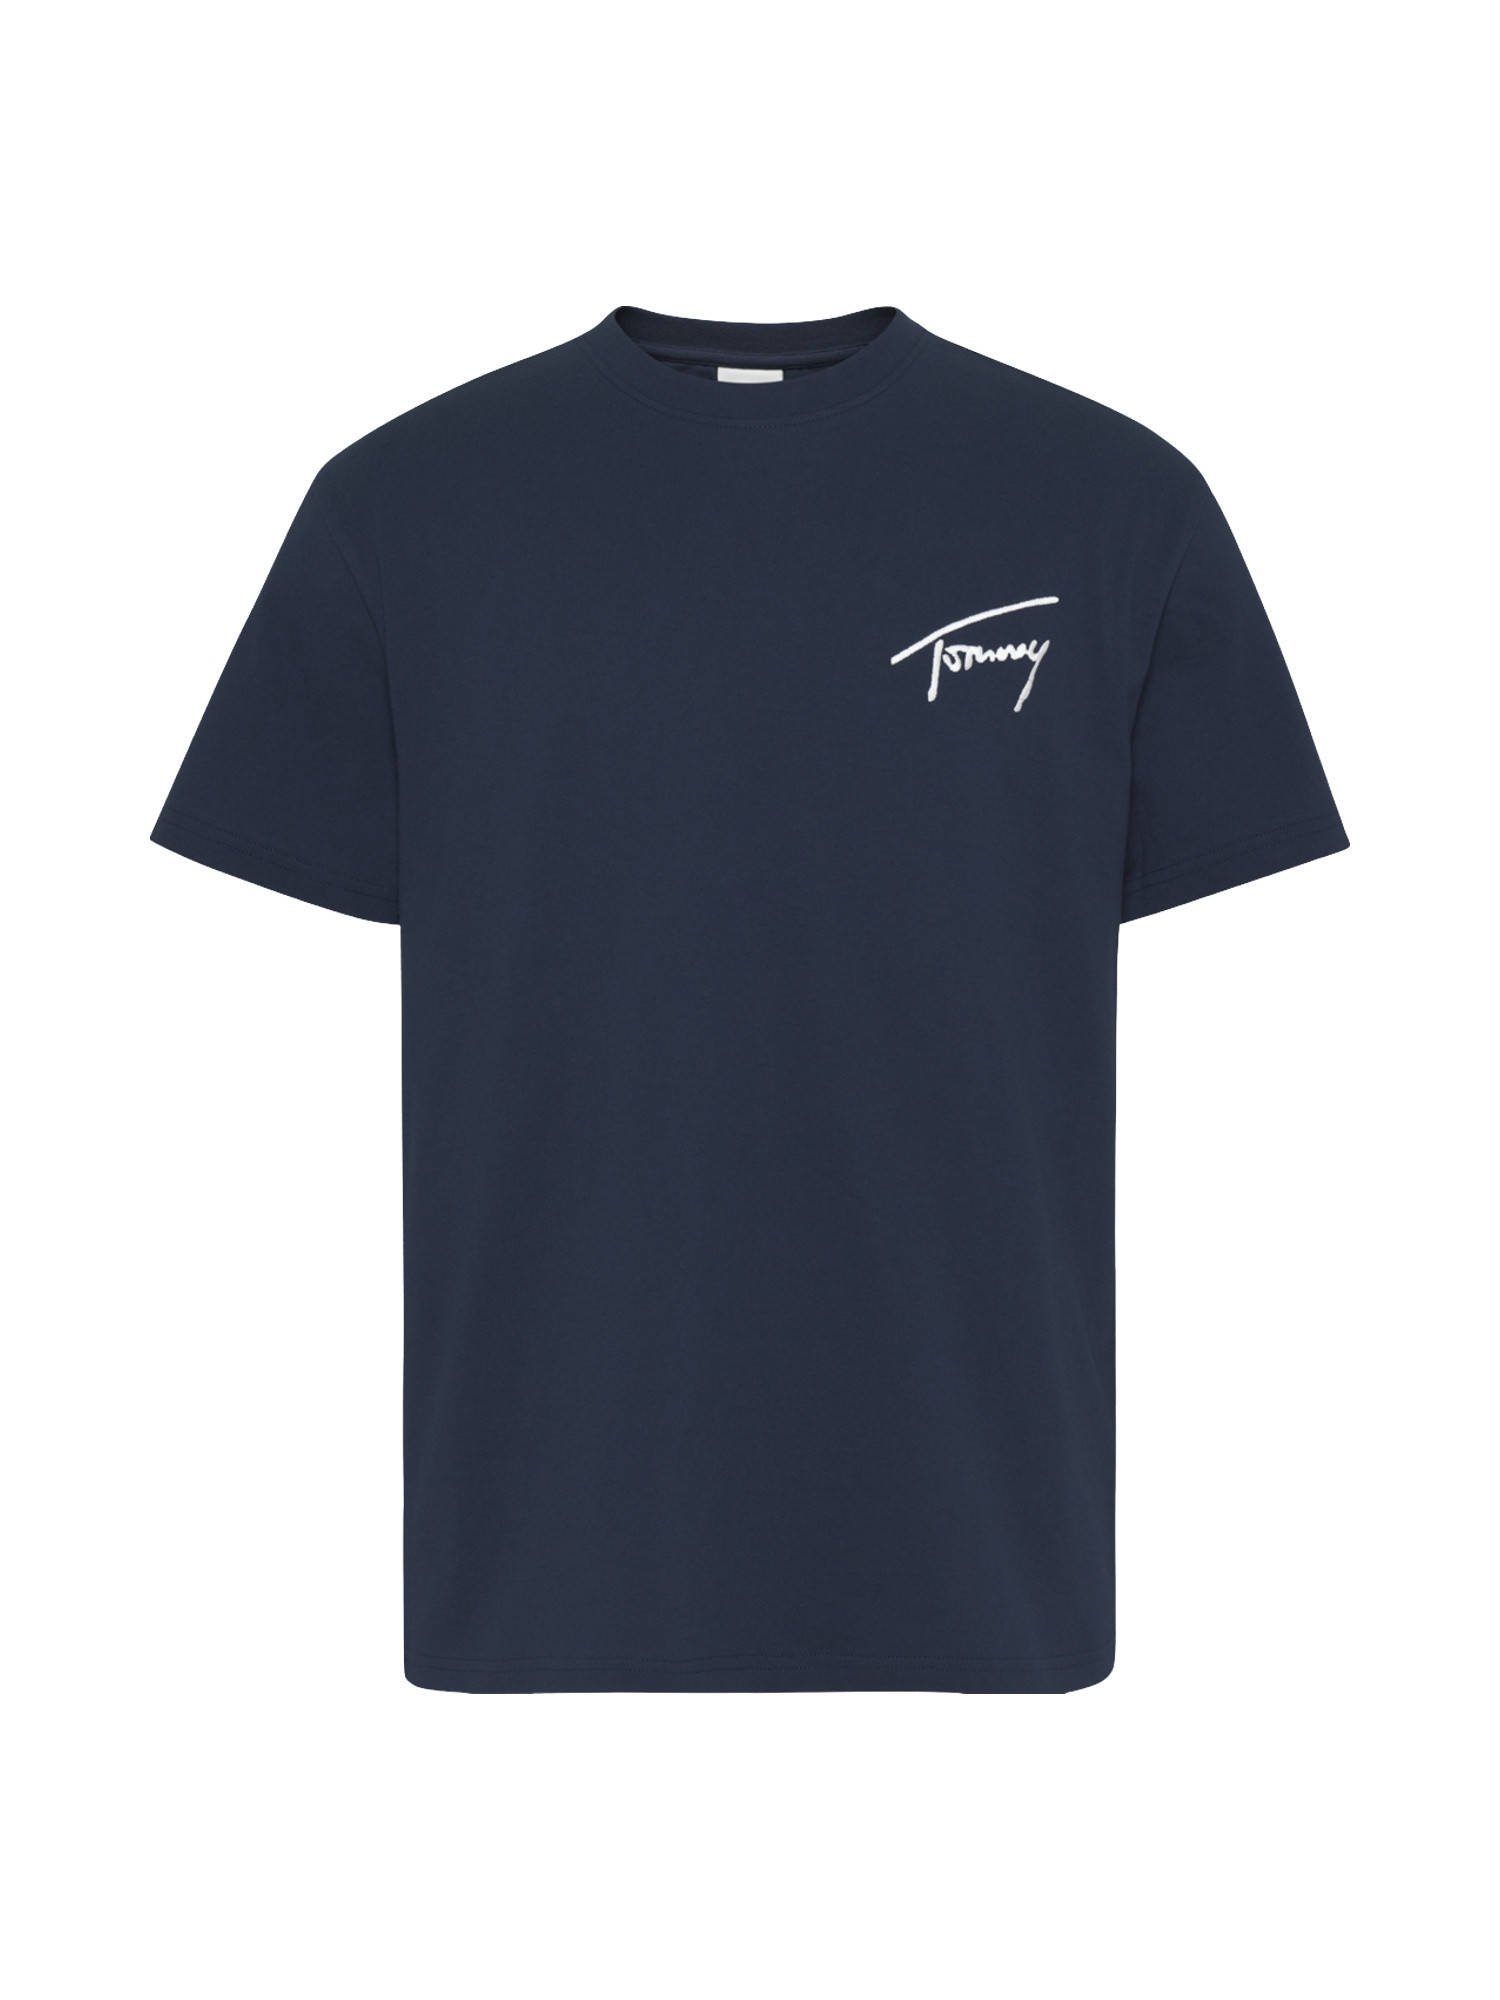 T-shirt con stampa signature, Blu, large image number 0